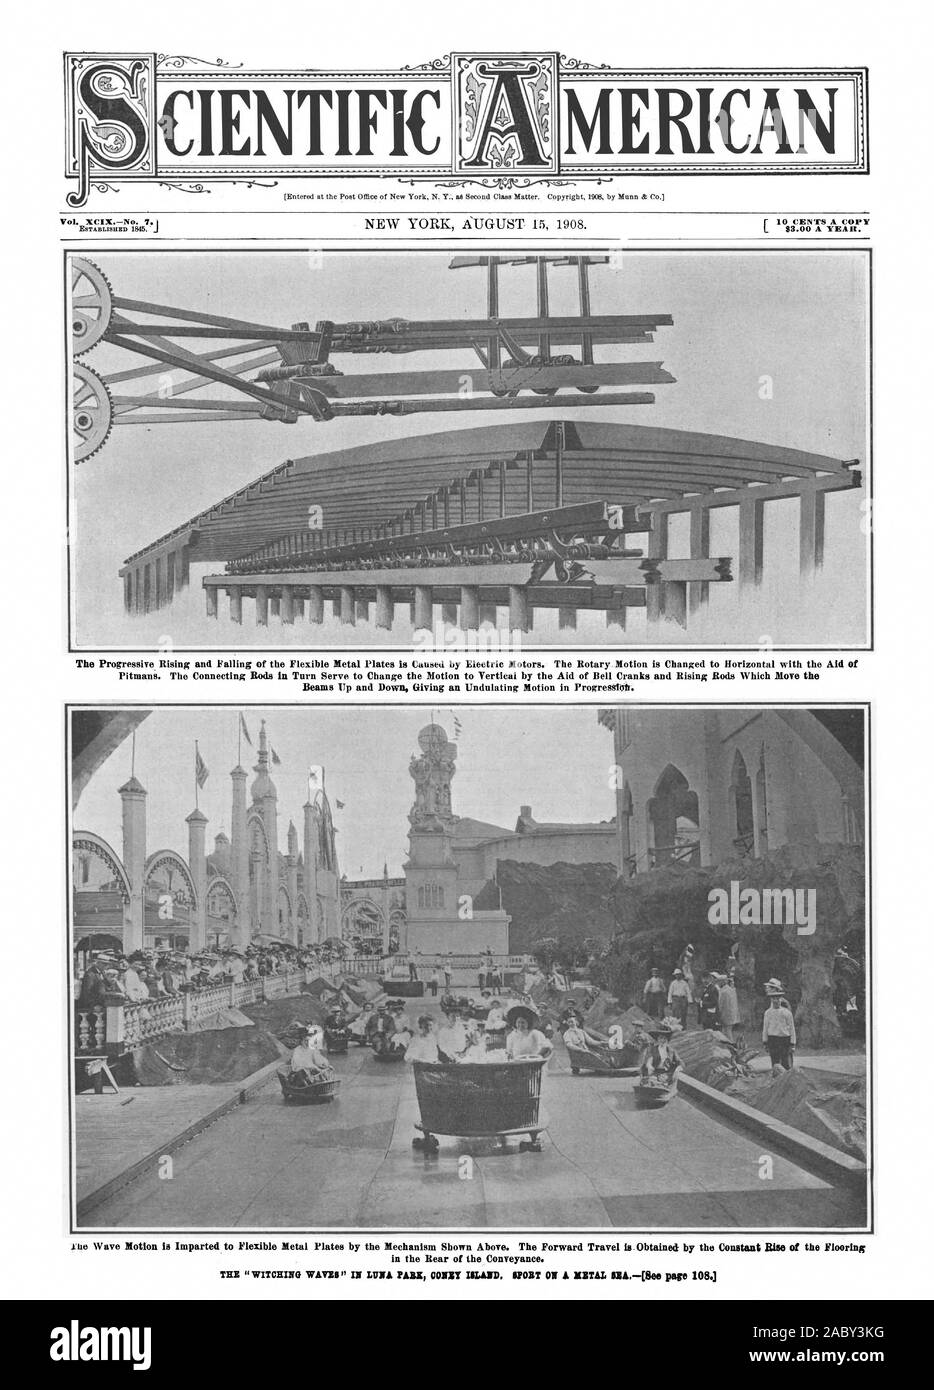 MERICA CIENTIFIC in the Rear of the Conveyance., scientific american, 1908-08-15, the witching waves in Luna Park, Coney Island Stock Photo